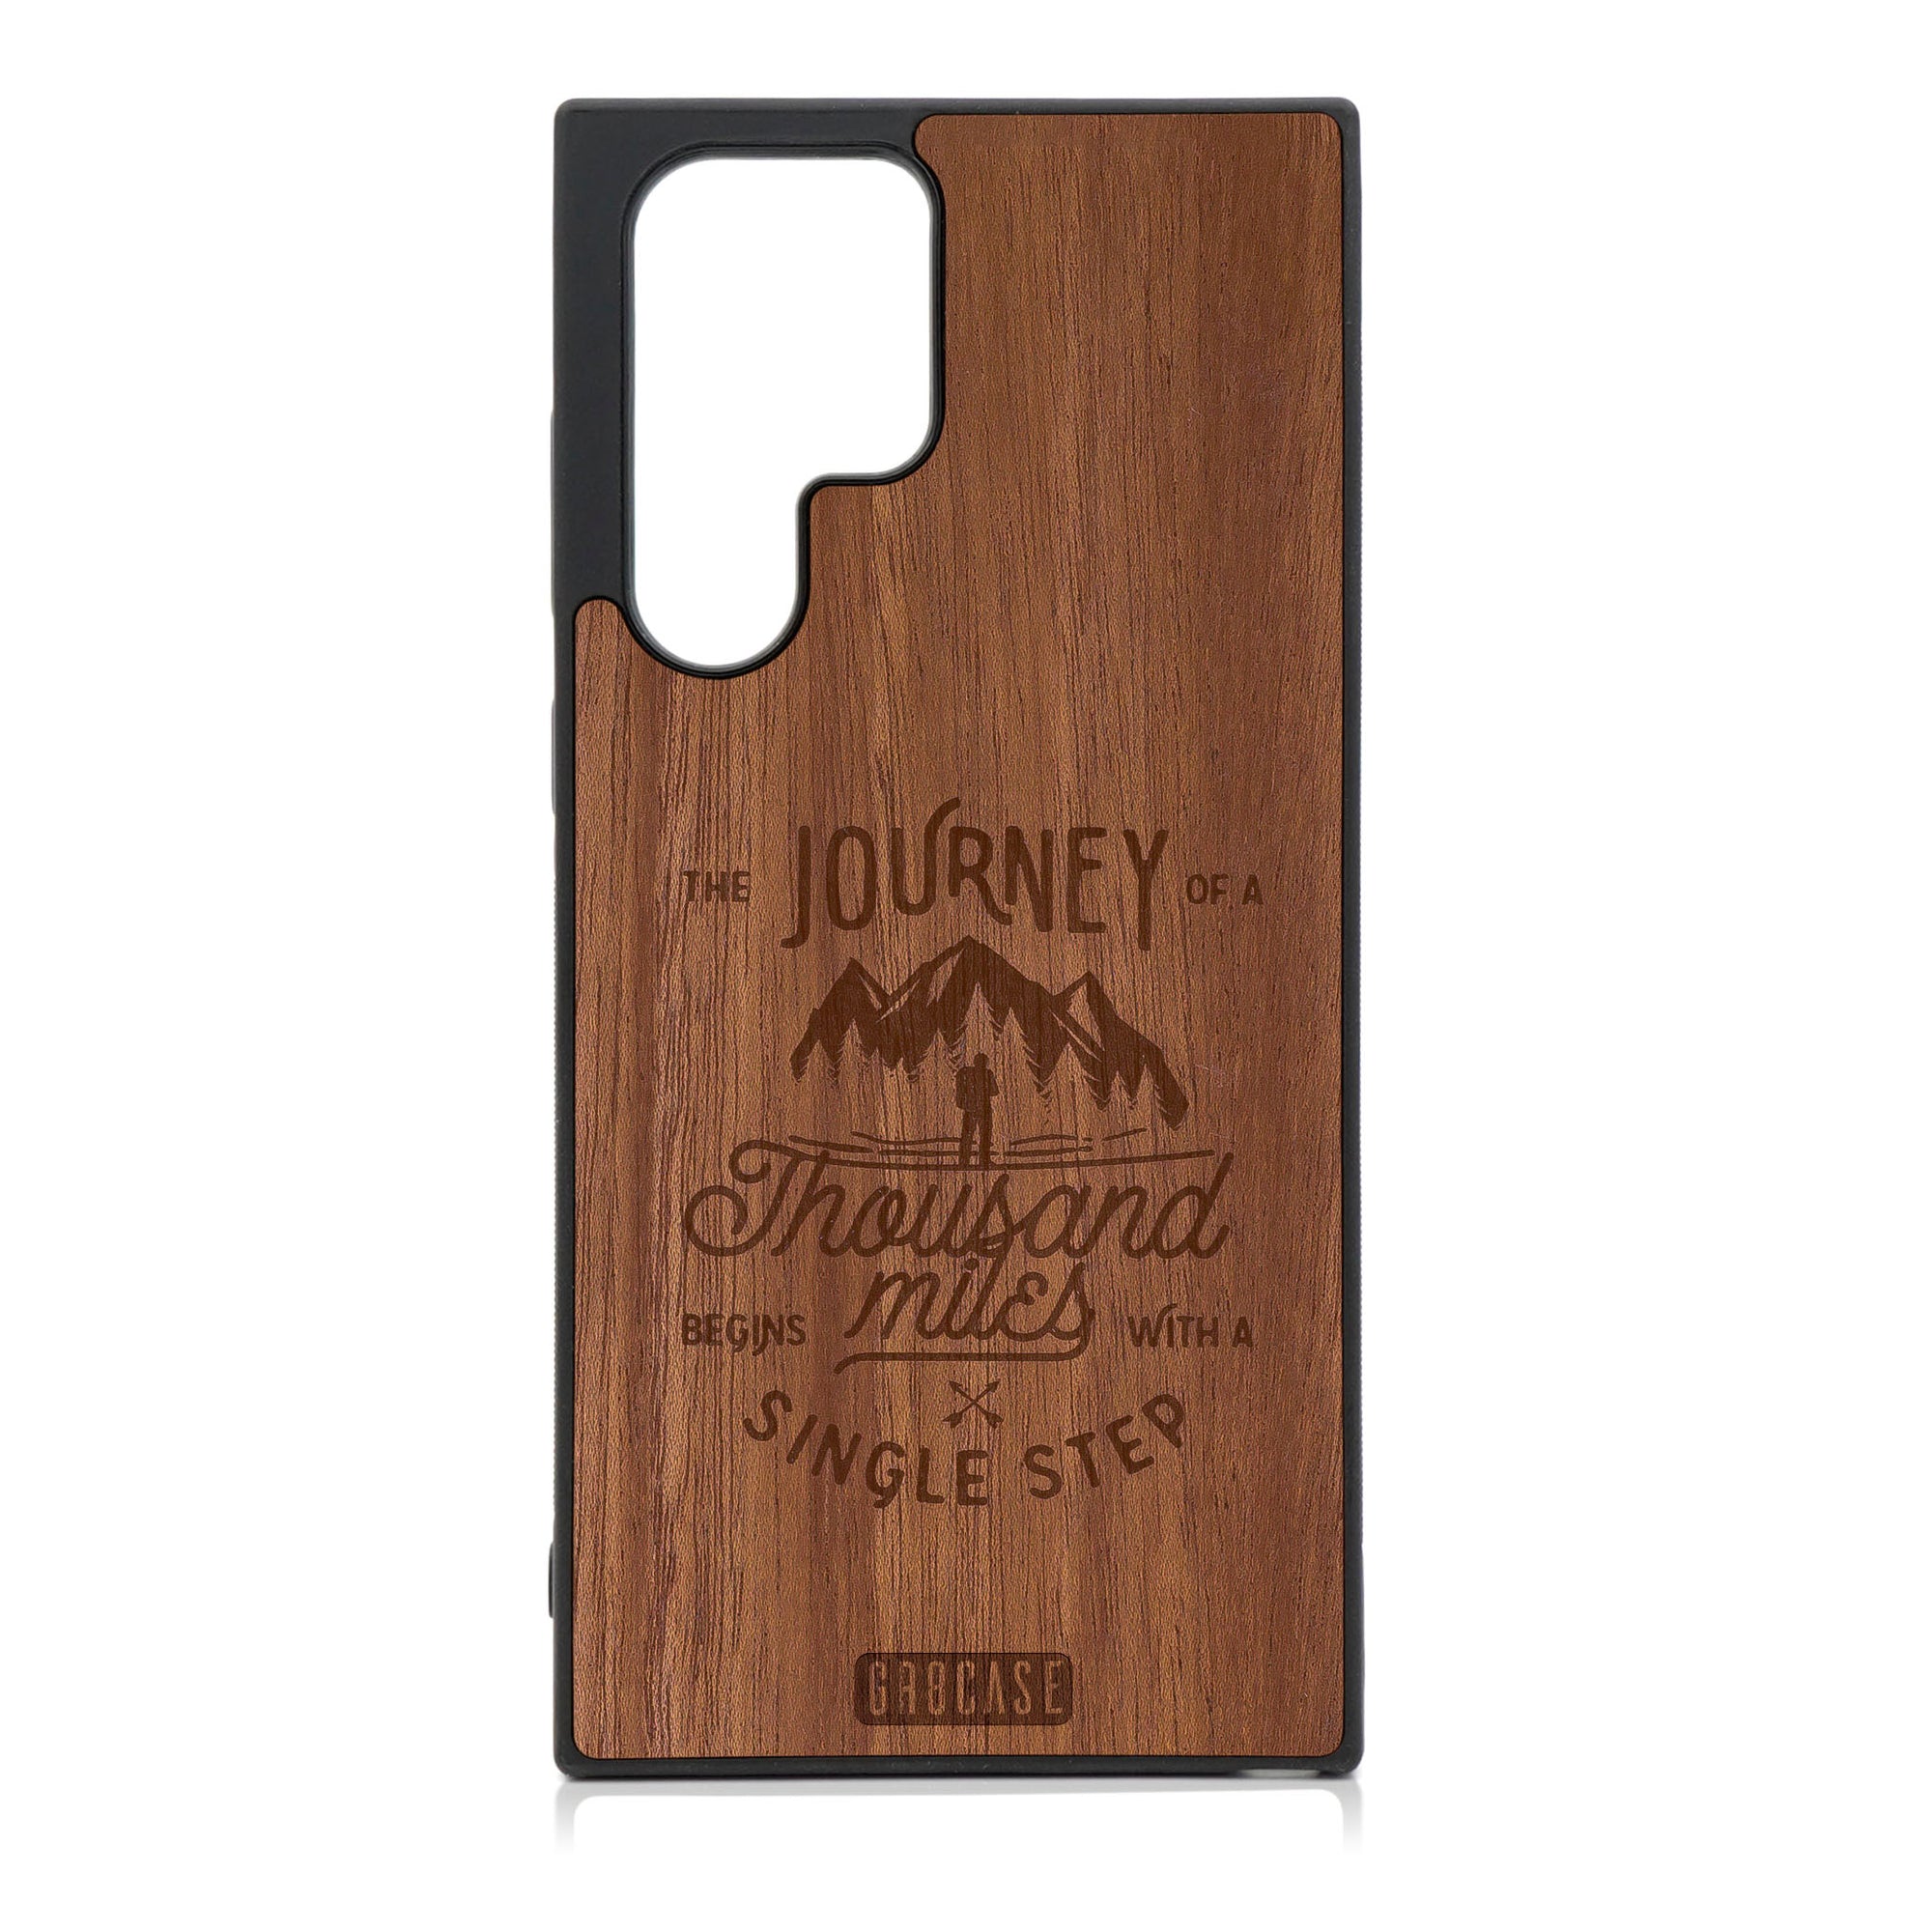 The Journey Of A Thousand Miles Begins With A Single Step Design Wood Case For Galaxy S22 Ultra